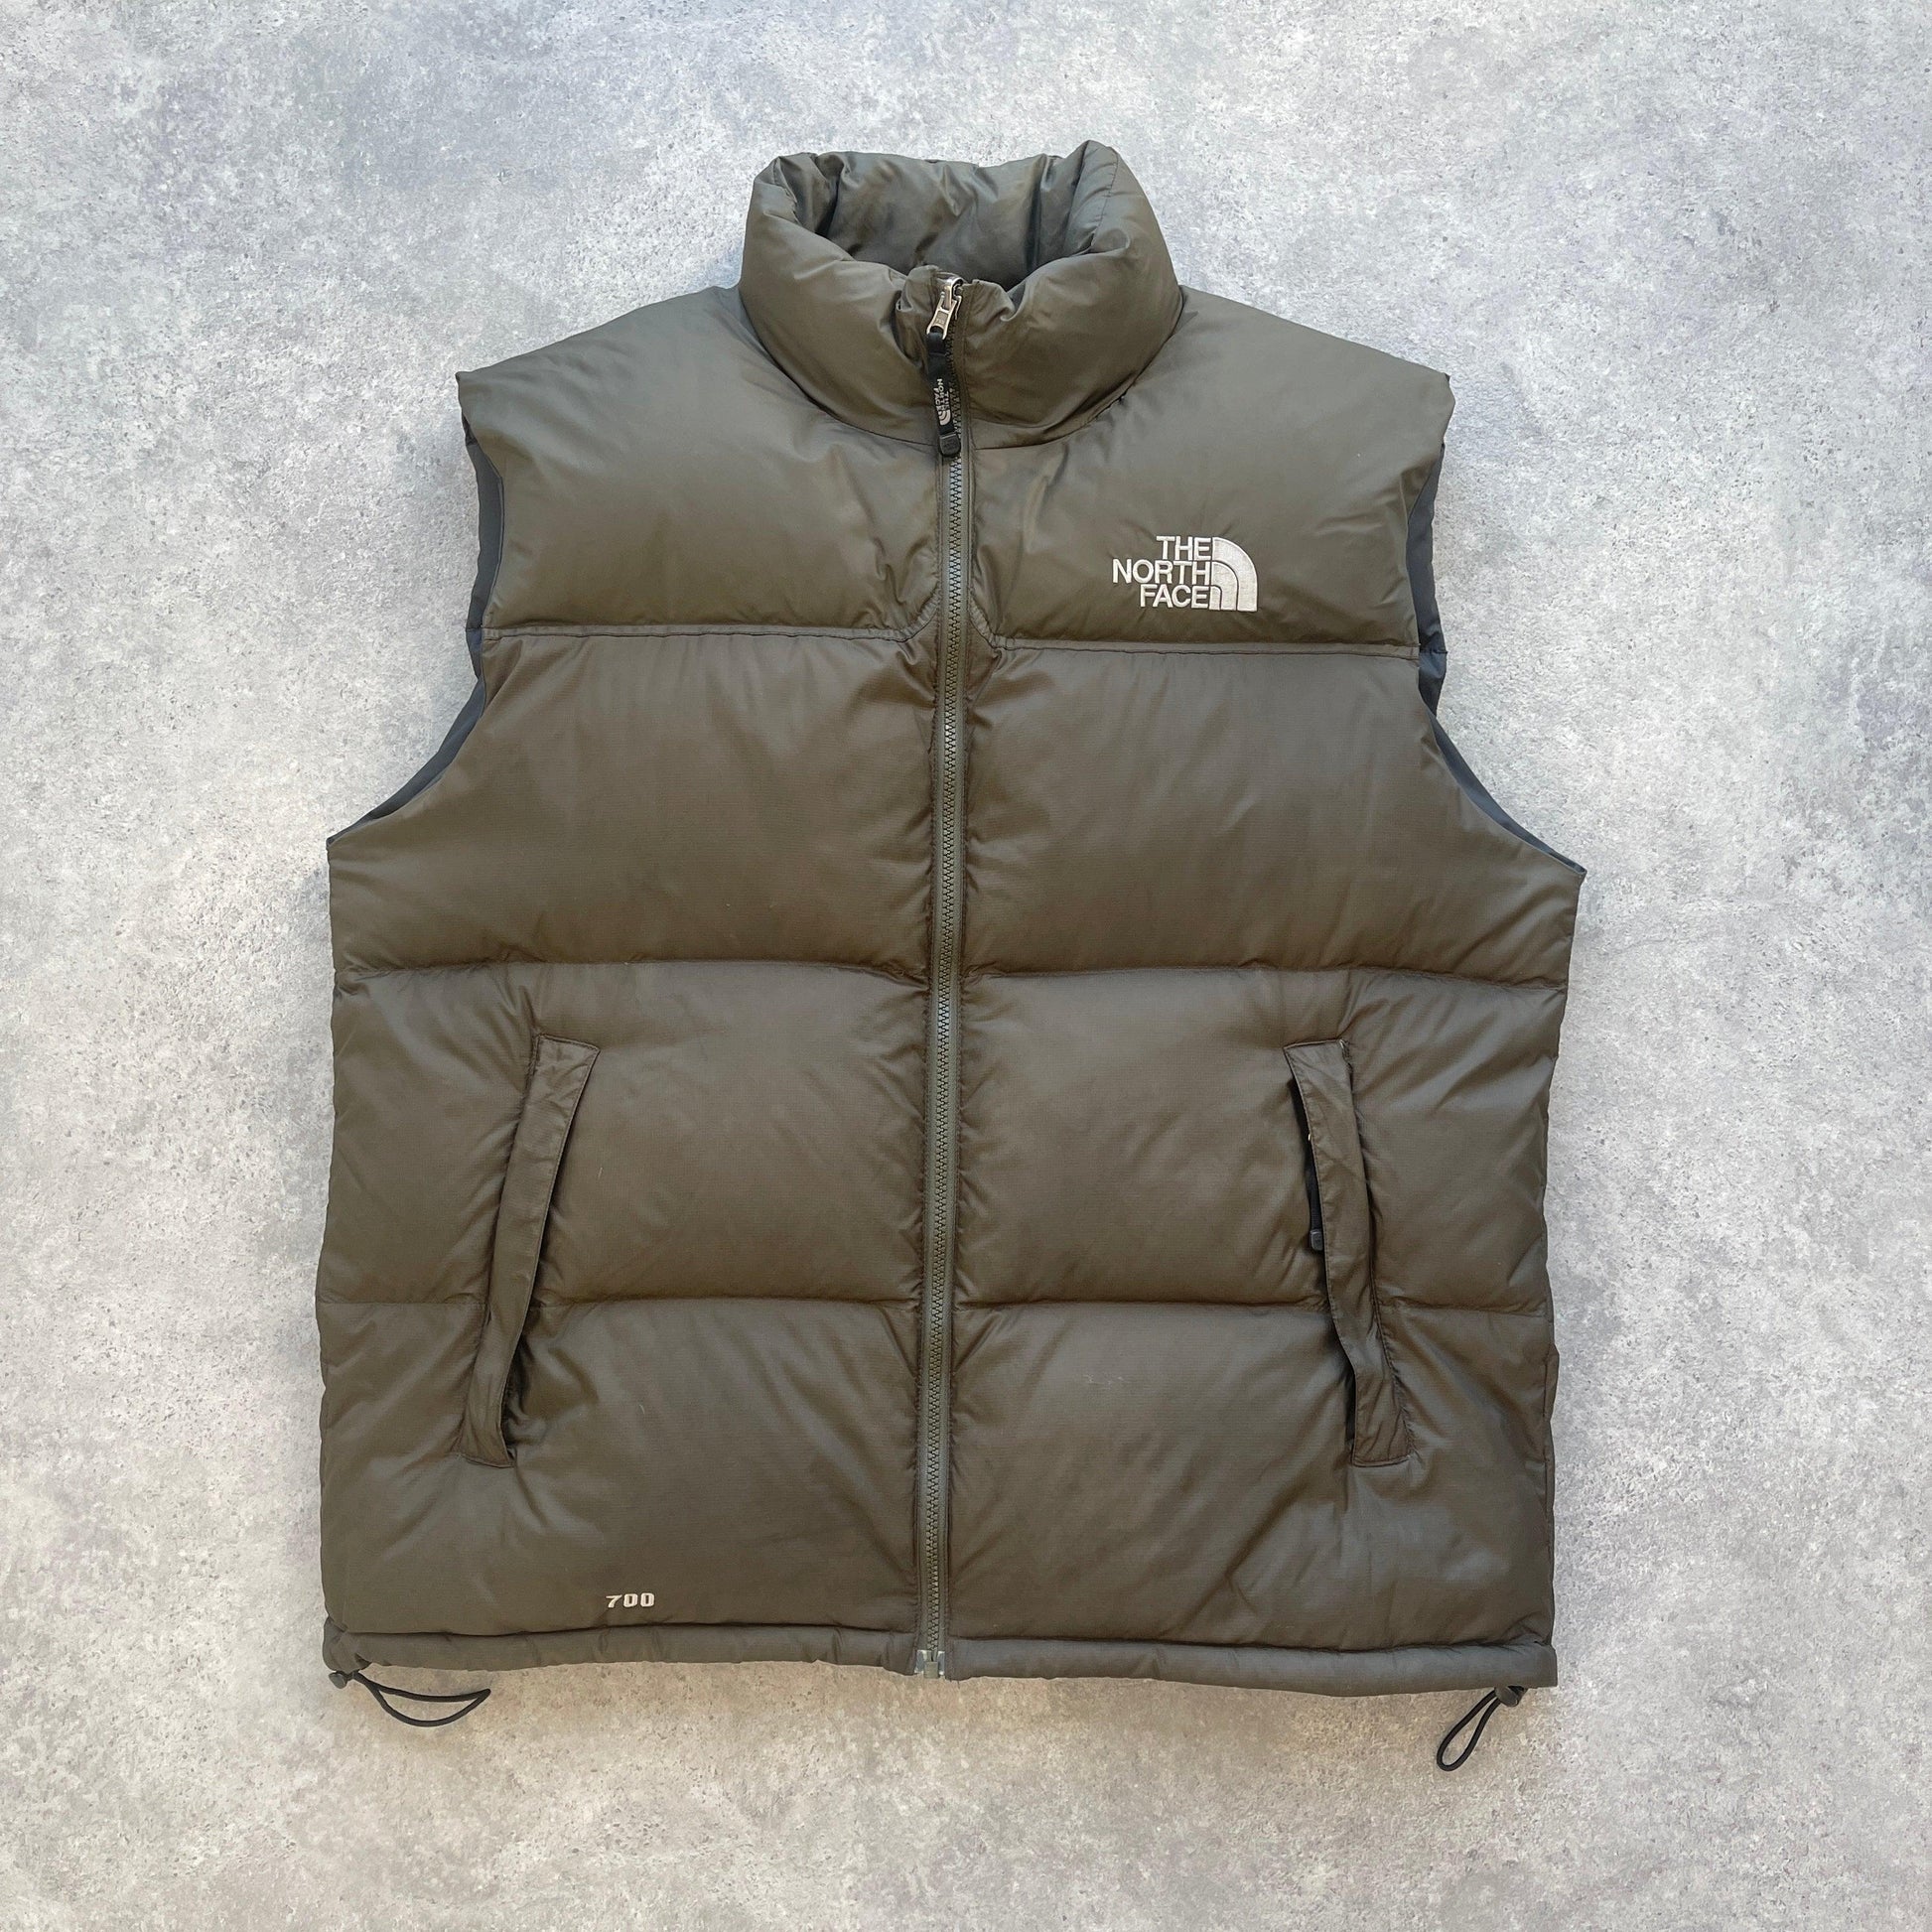 The North Face RARE Nuptse 700 down fill puffer gilet (XL) - Known Source